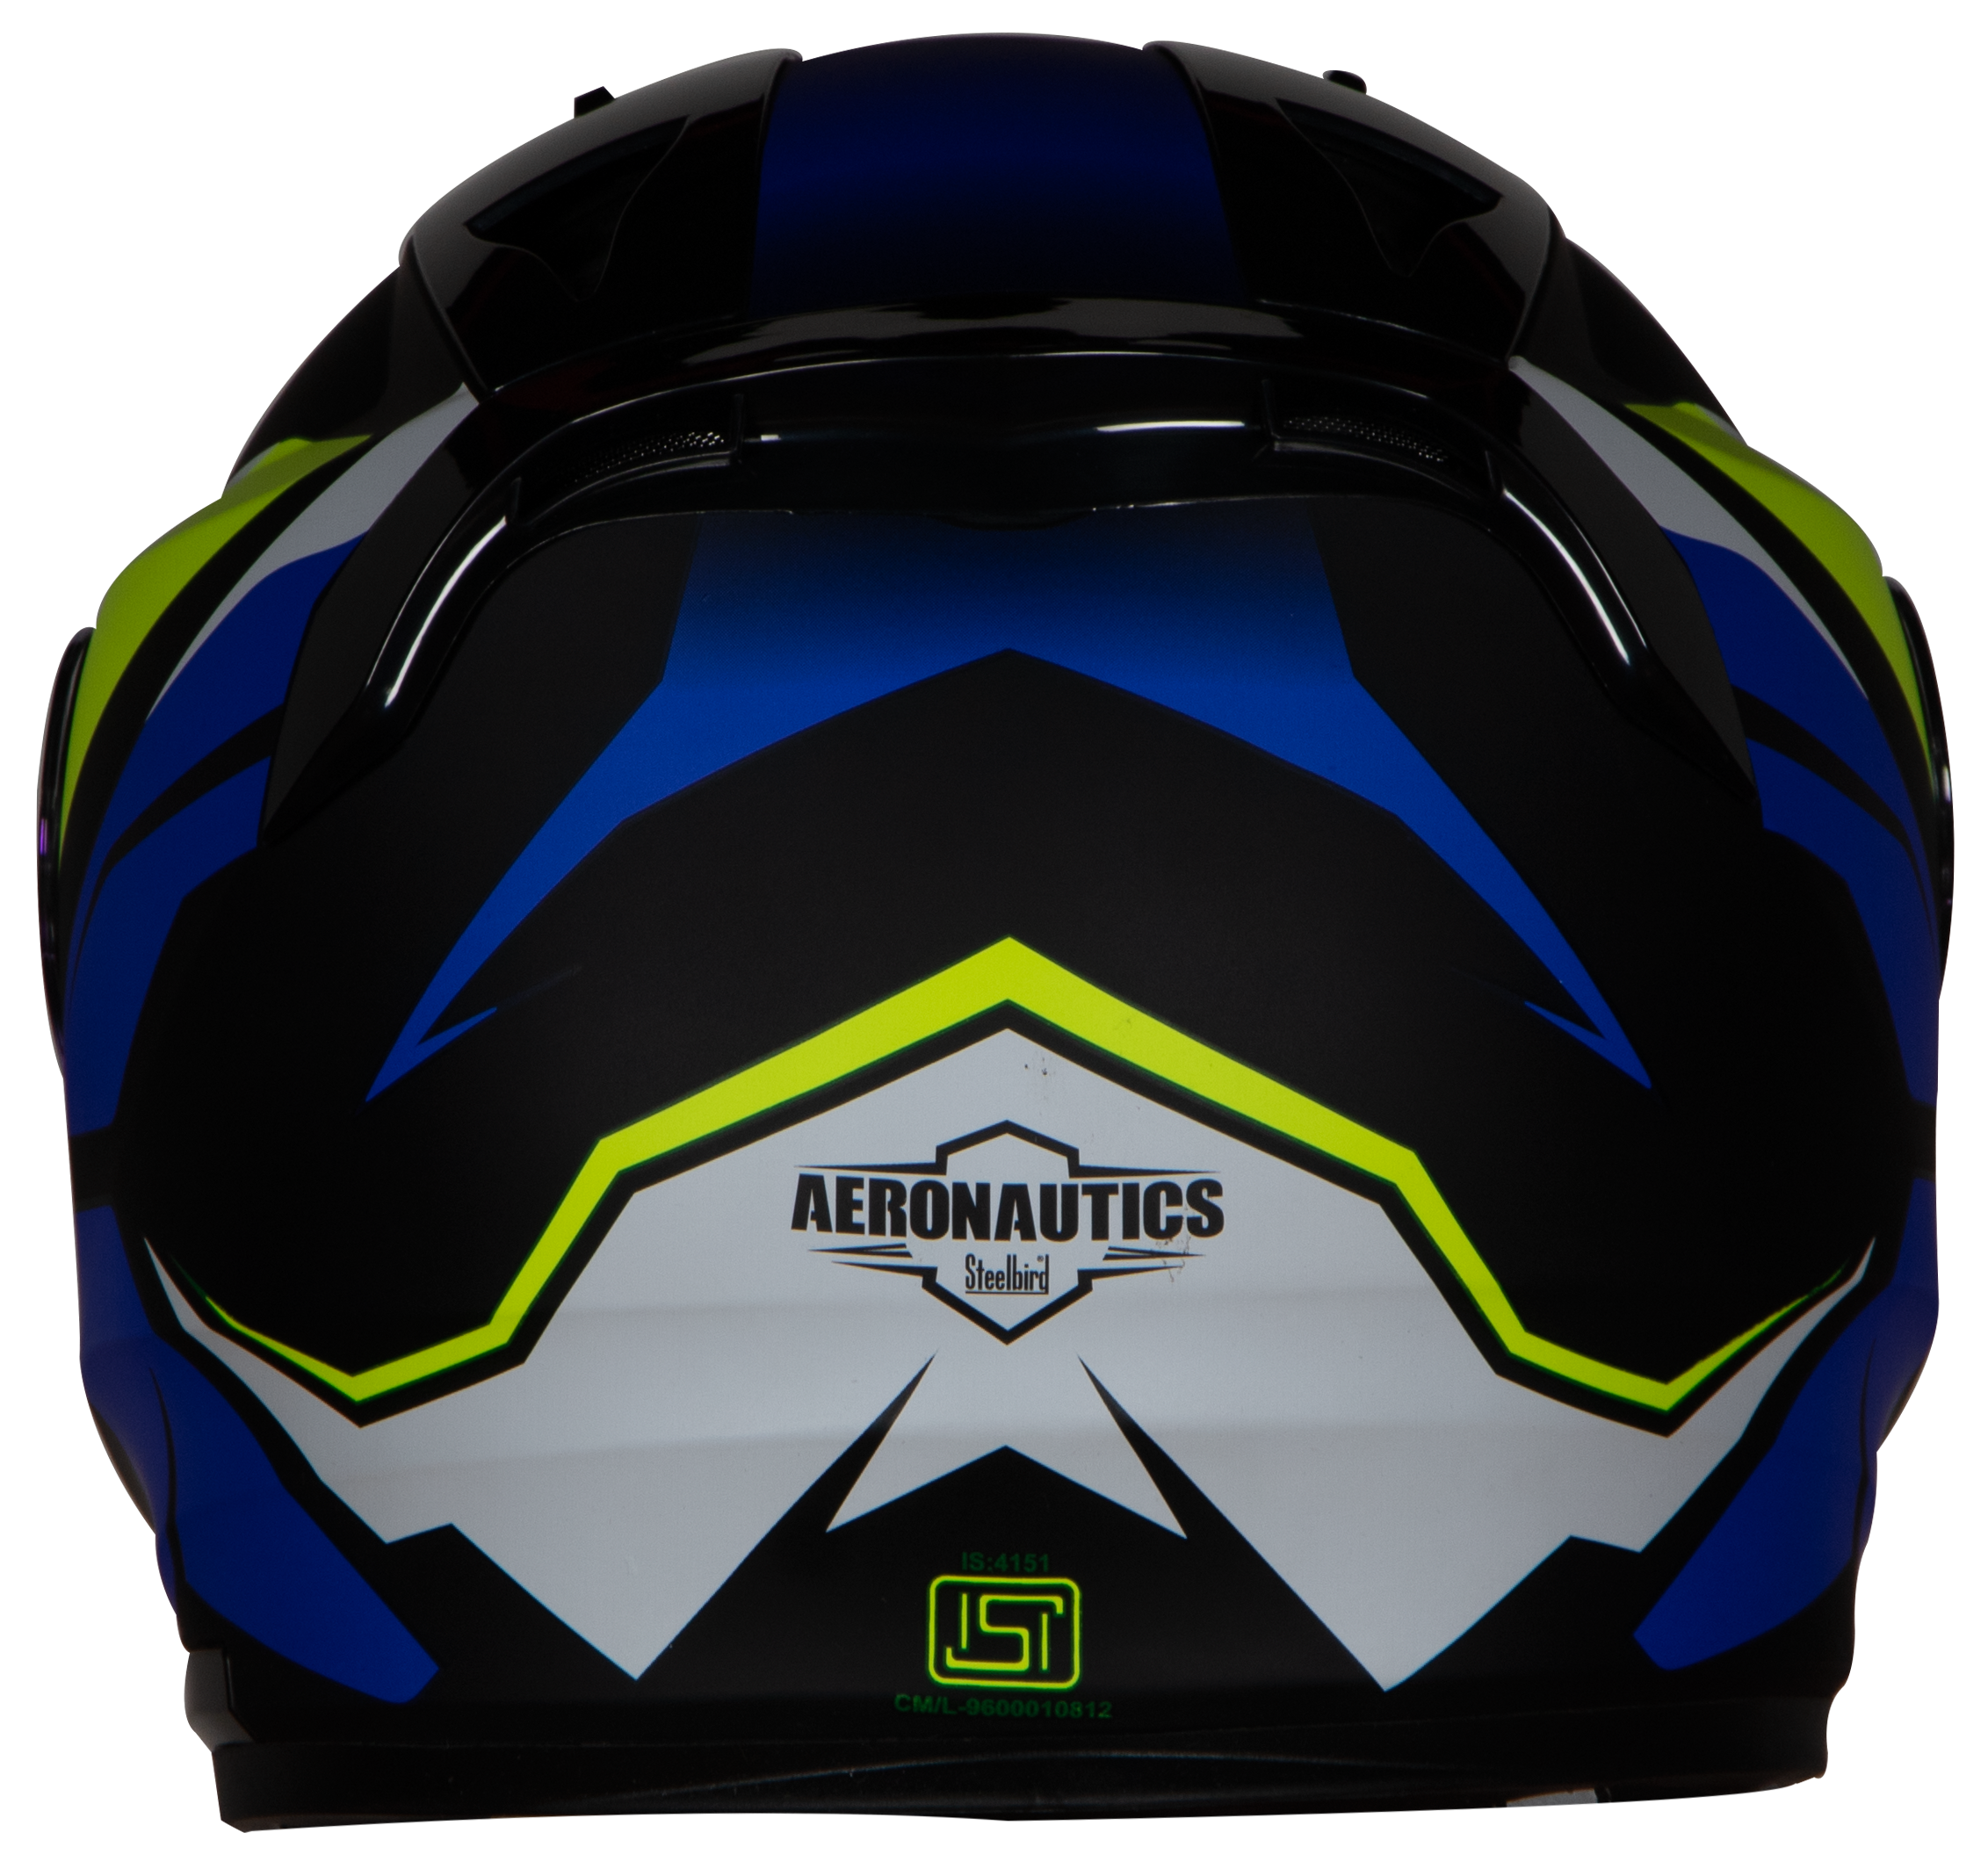 SA-1 Aviate Mat Black With Blue (Fitted With Clear Visor Extra Blue Night Vision Visor Free)